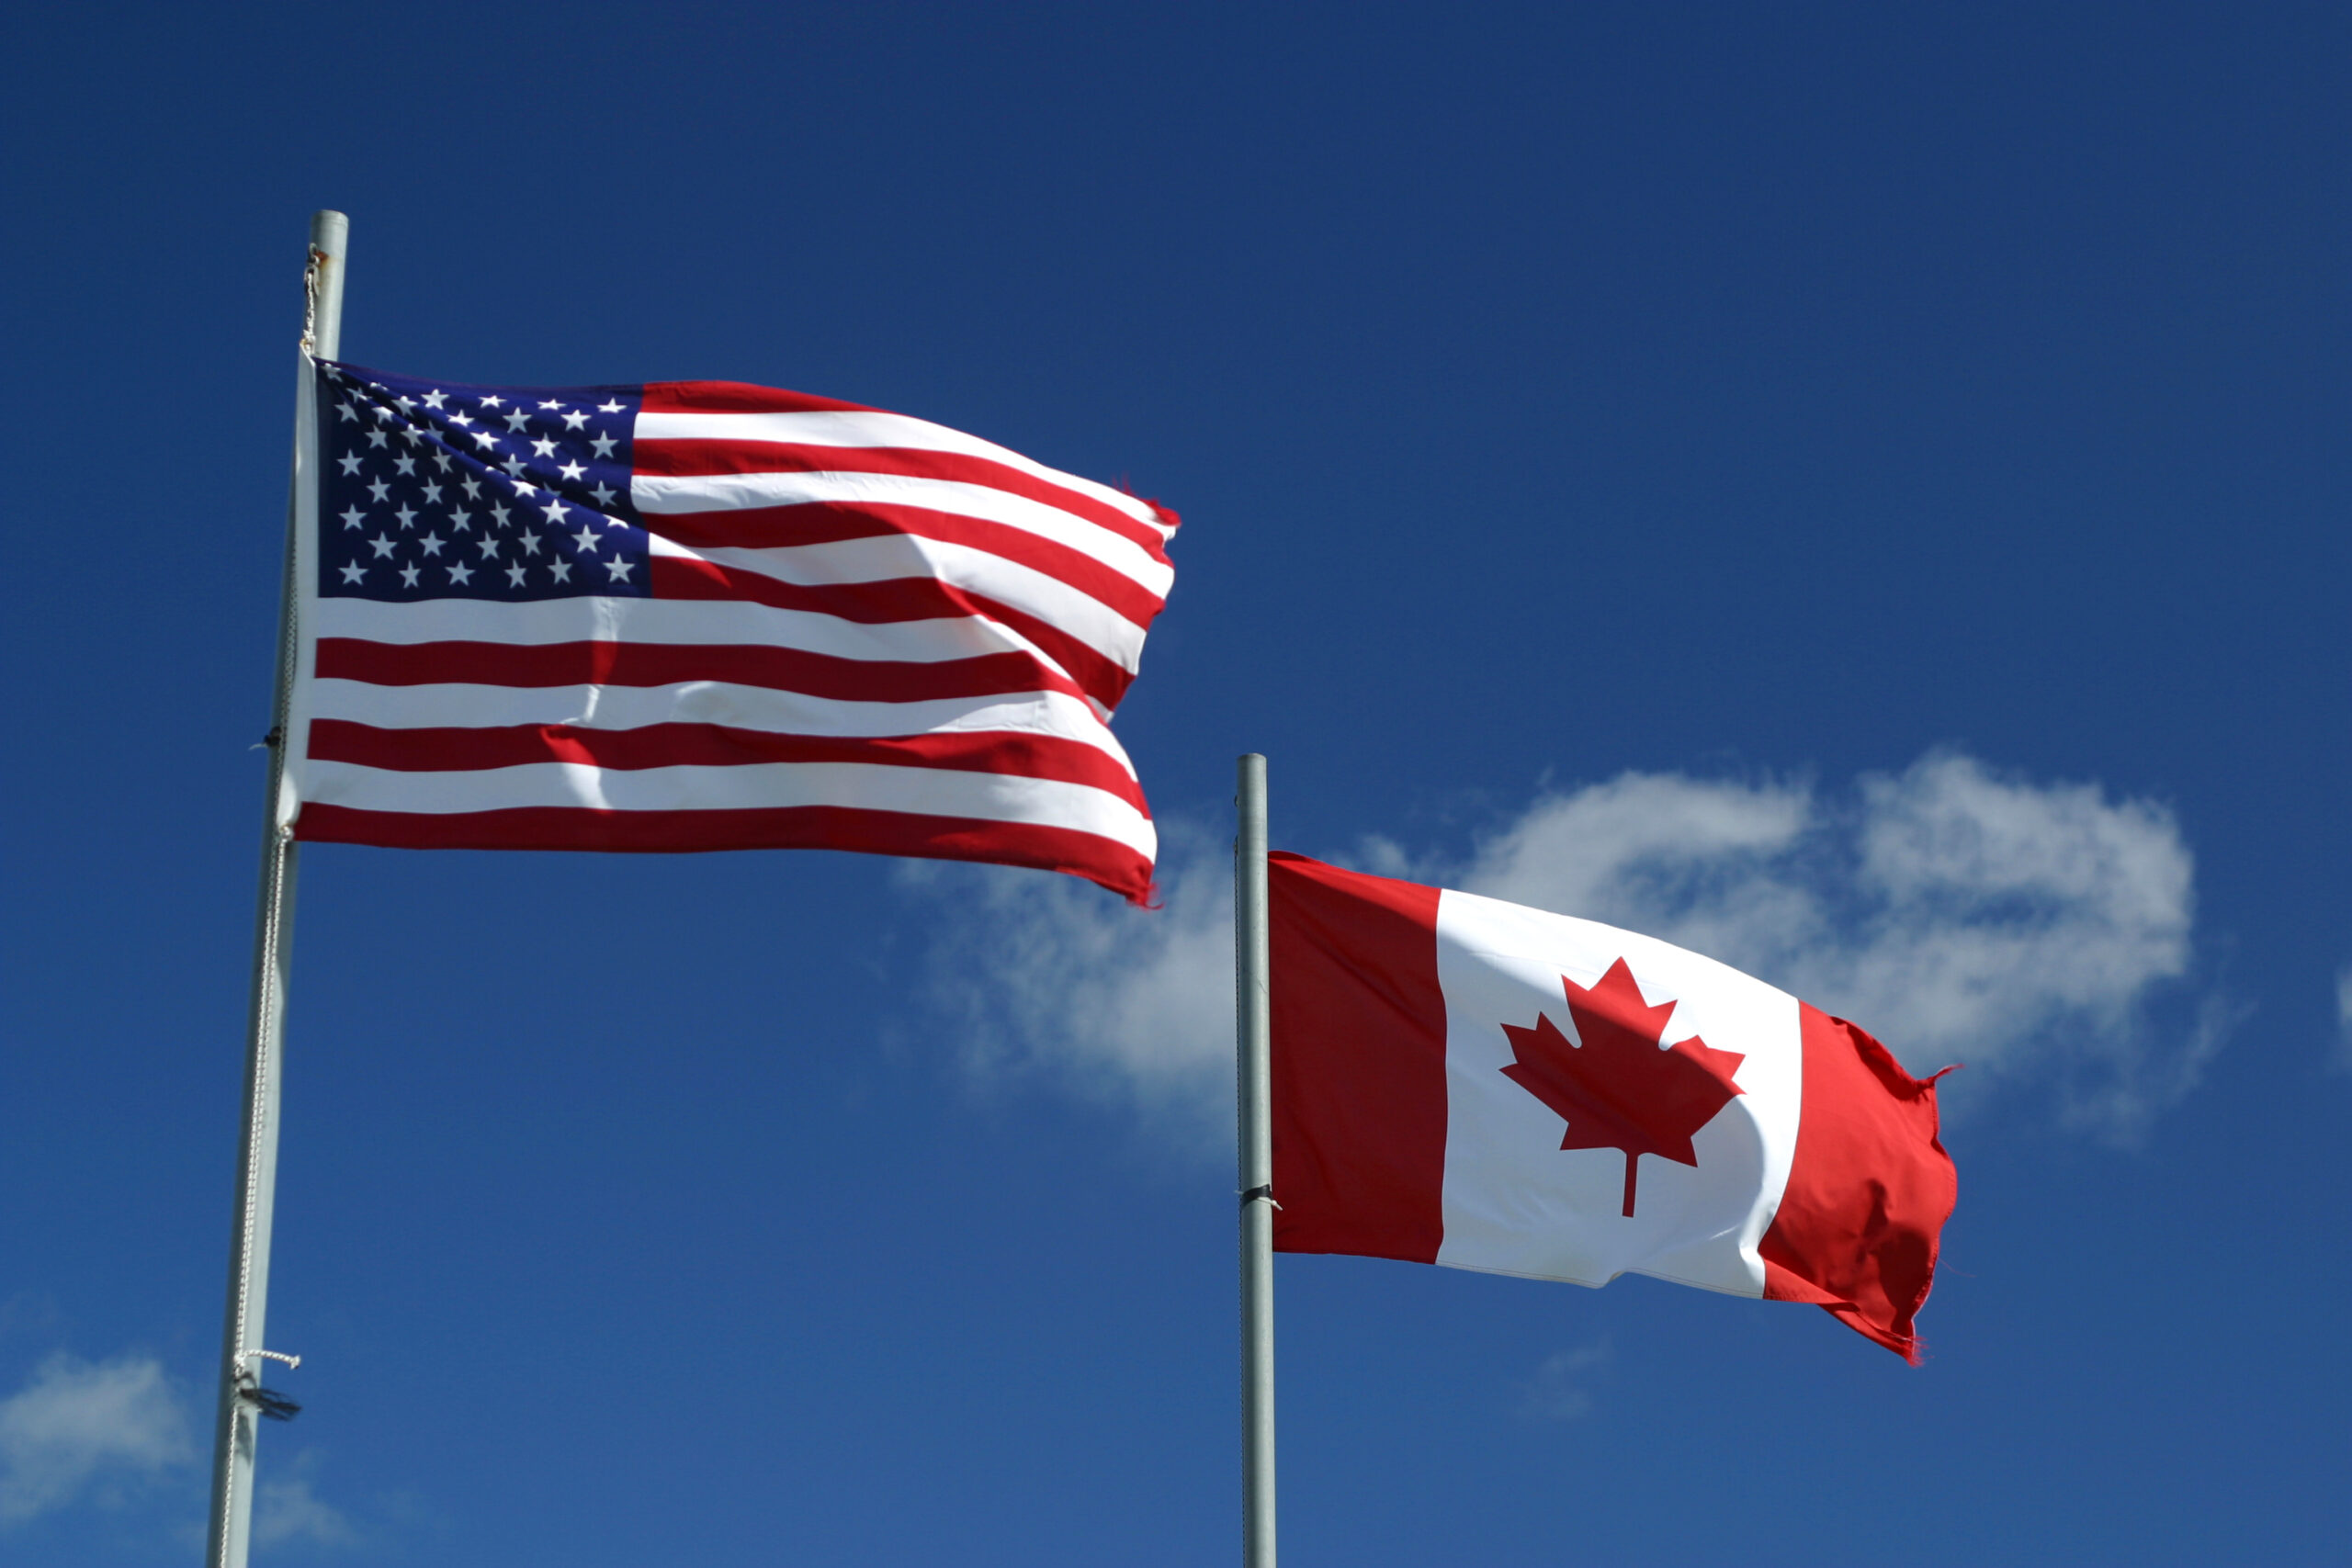 An American flag and Canadian flag 